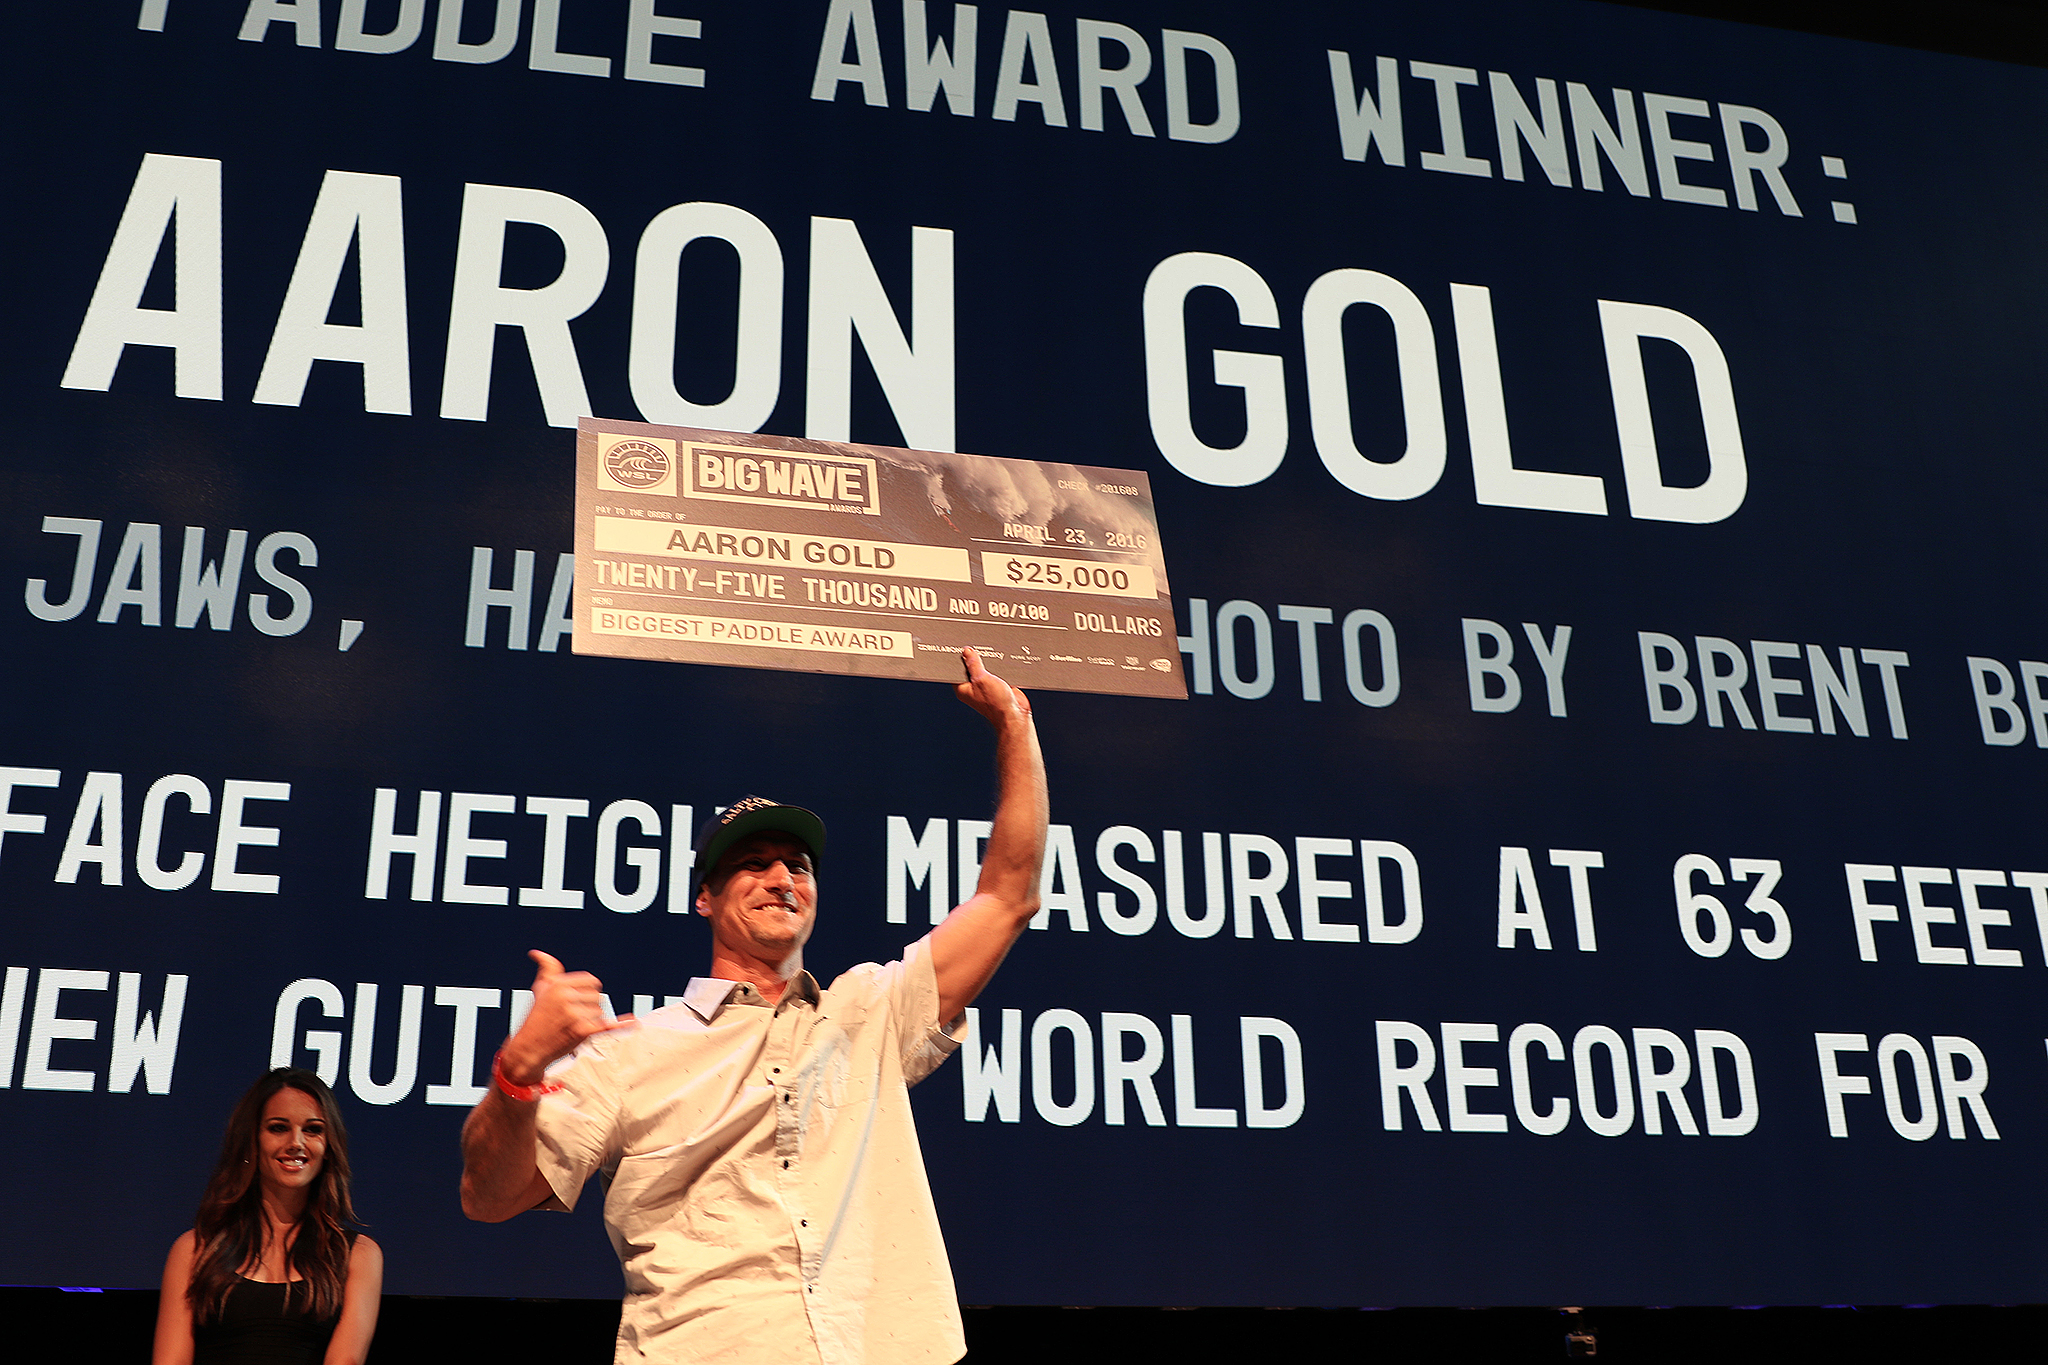 Aaron Gold accepting his award. Photo: WSL